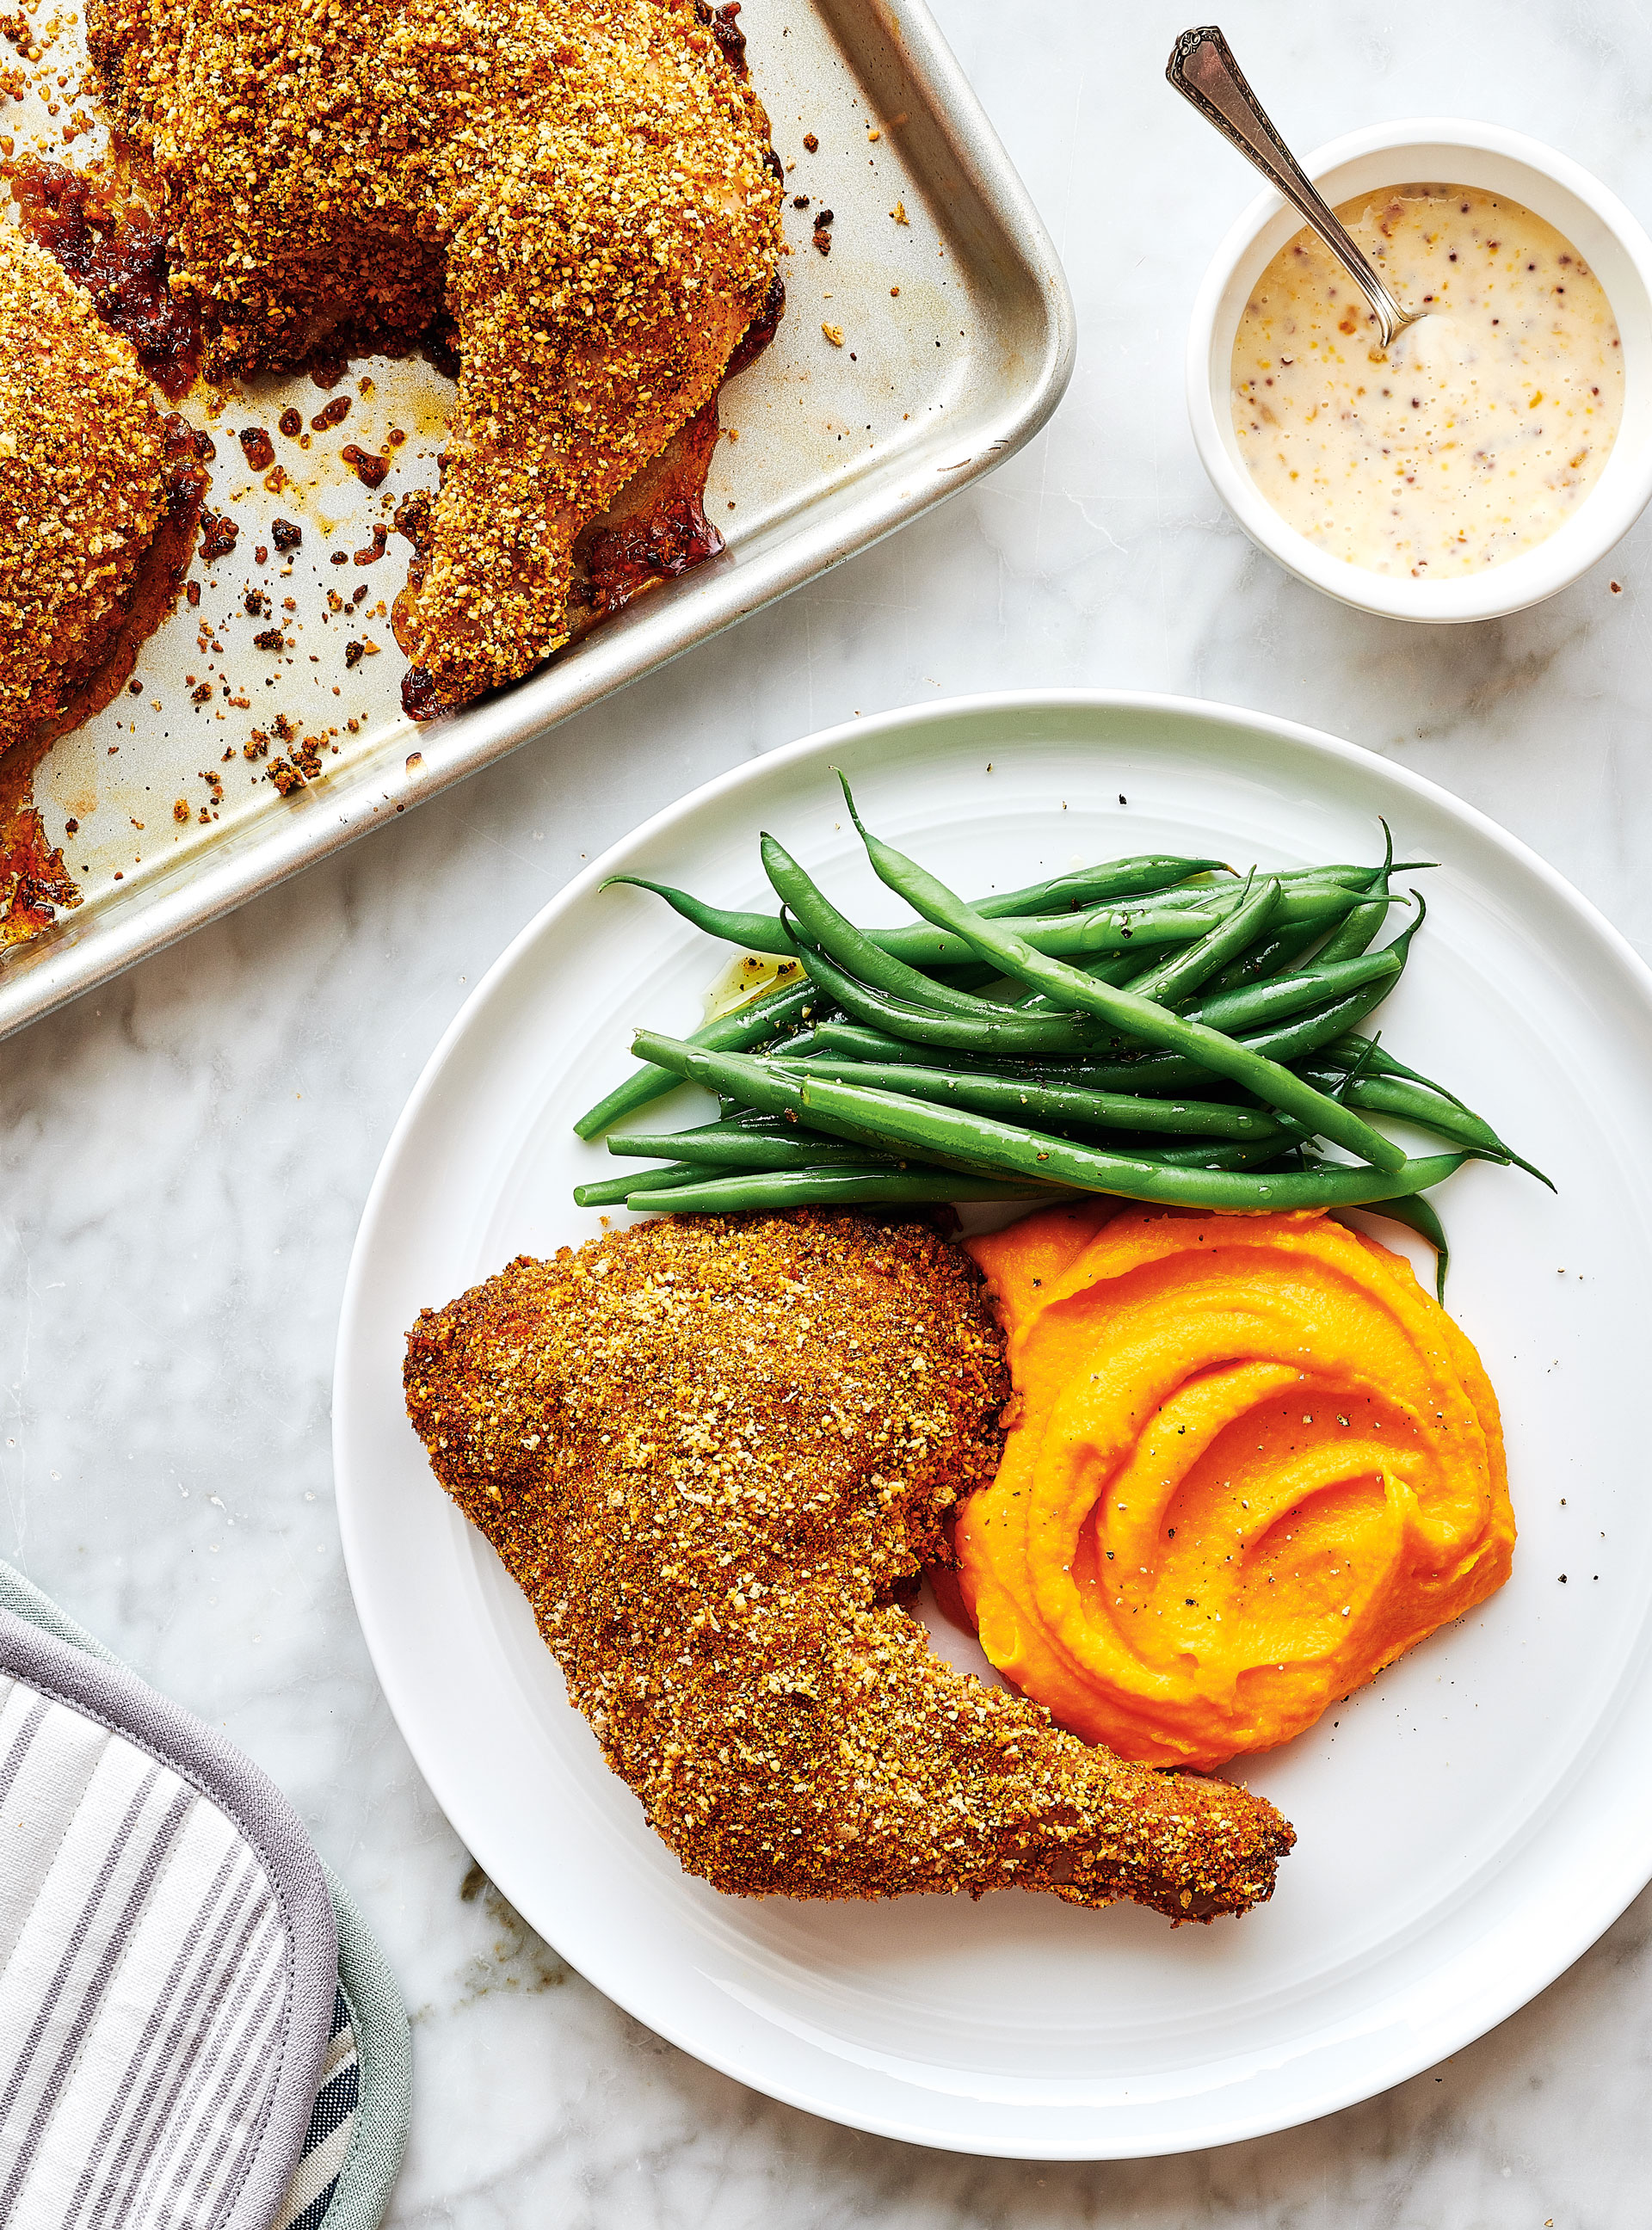 Baked Almond-Crusted Chicken with Carrot Purée